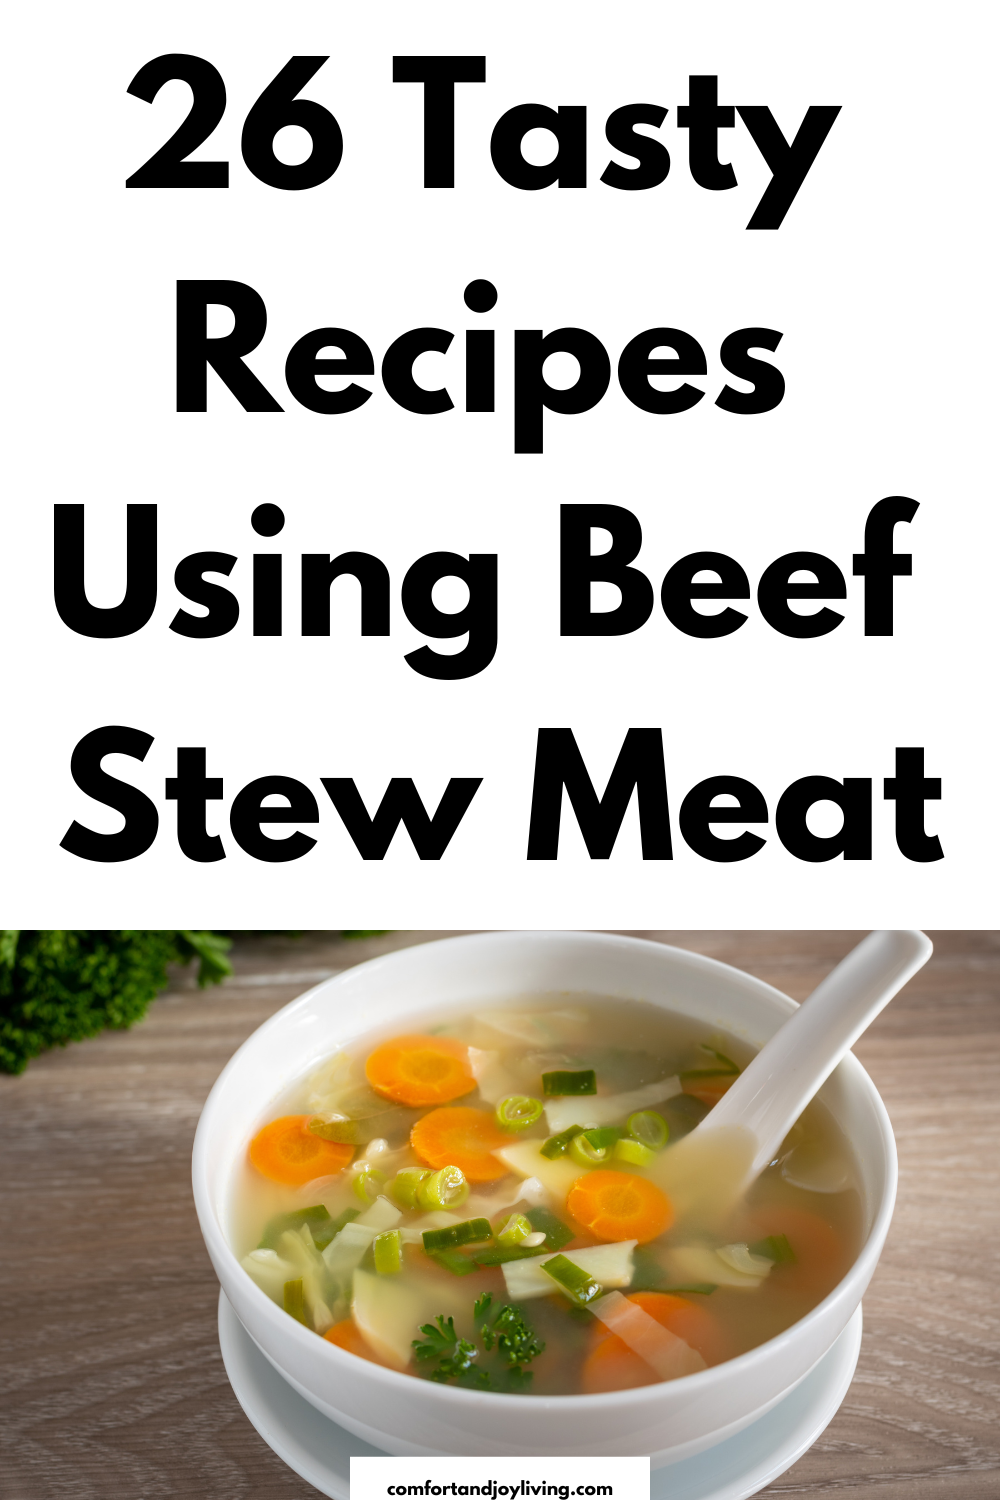 26 Tasty Recipes Using Beef Stew Meat